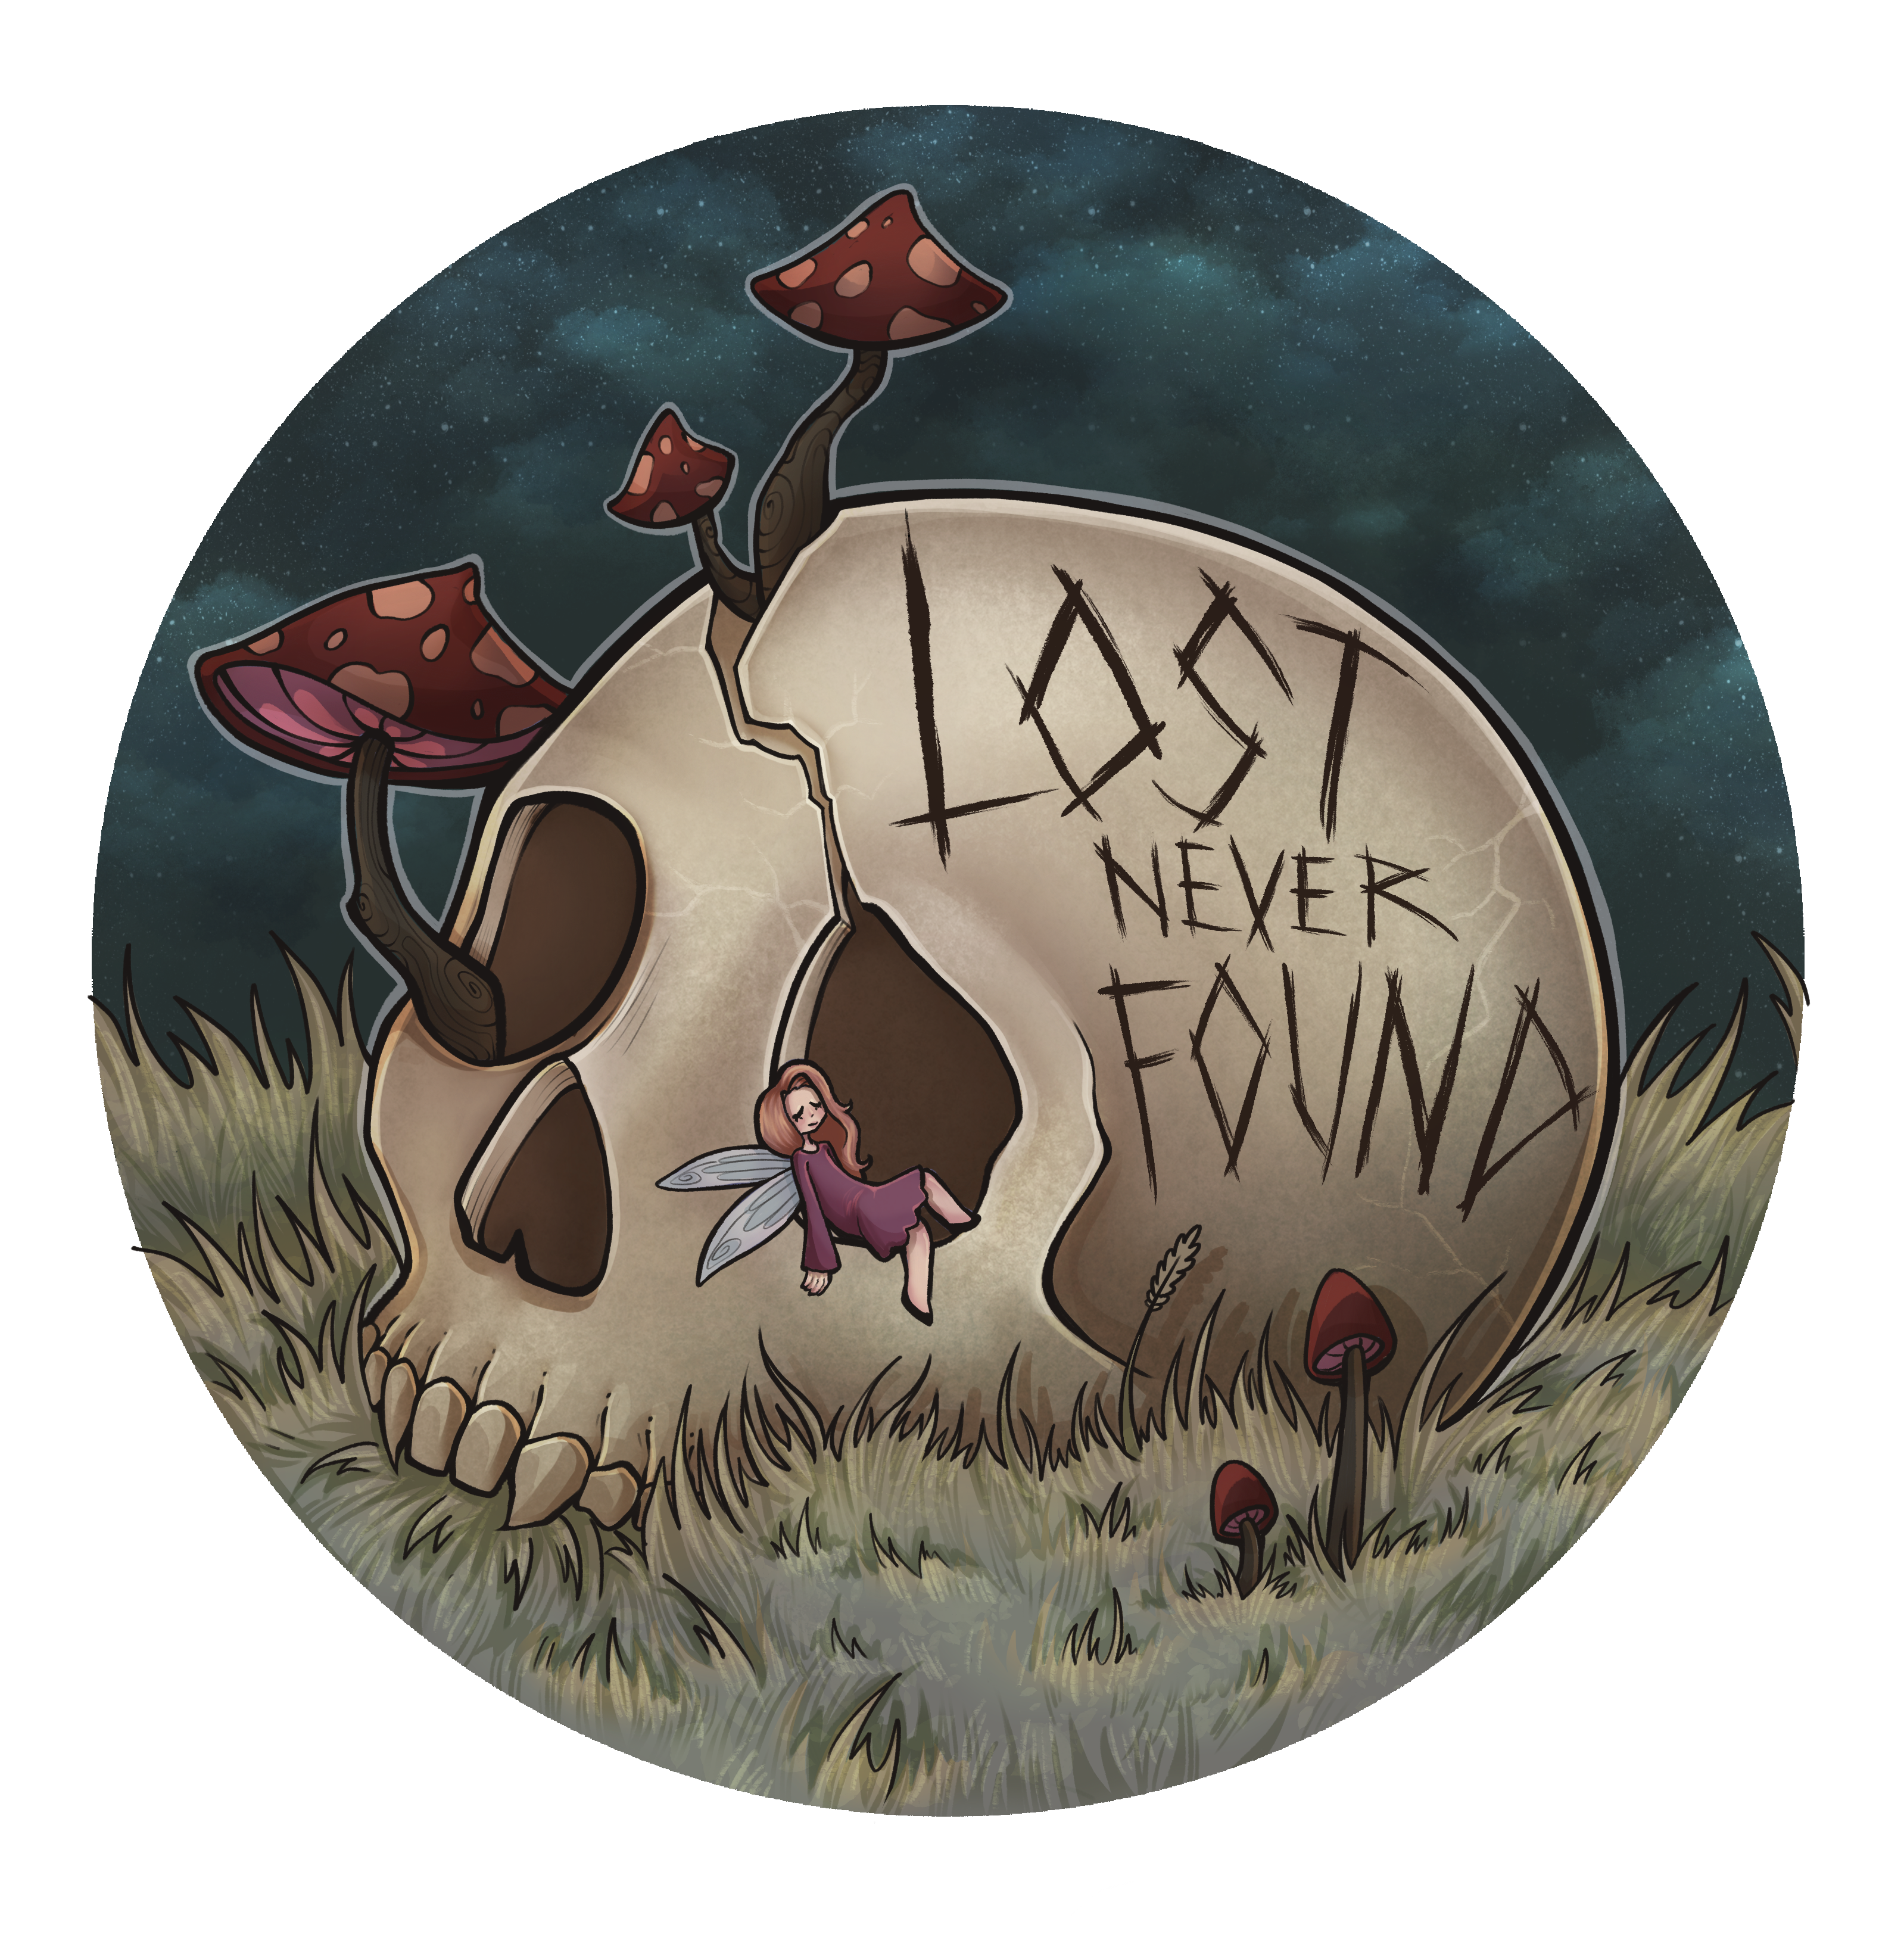 Lost Never Found